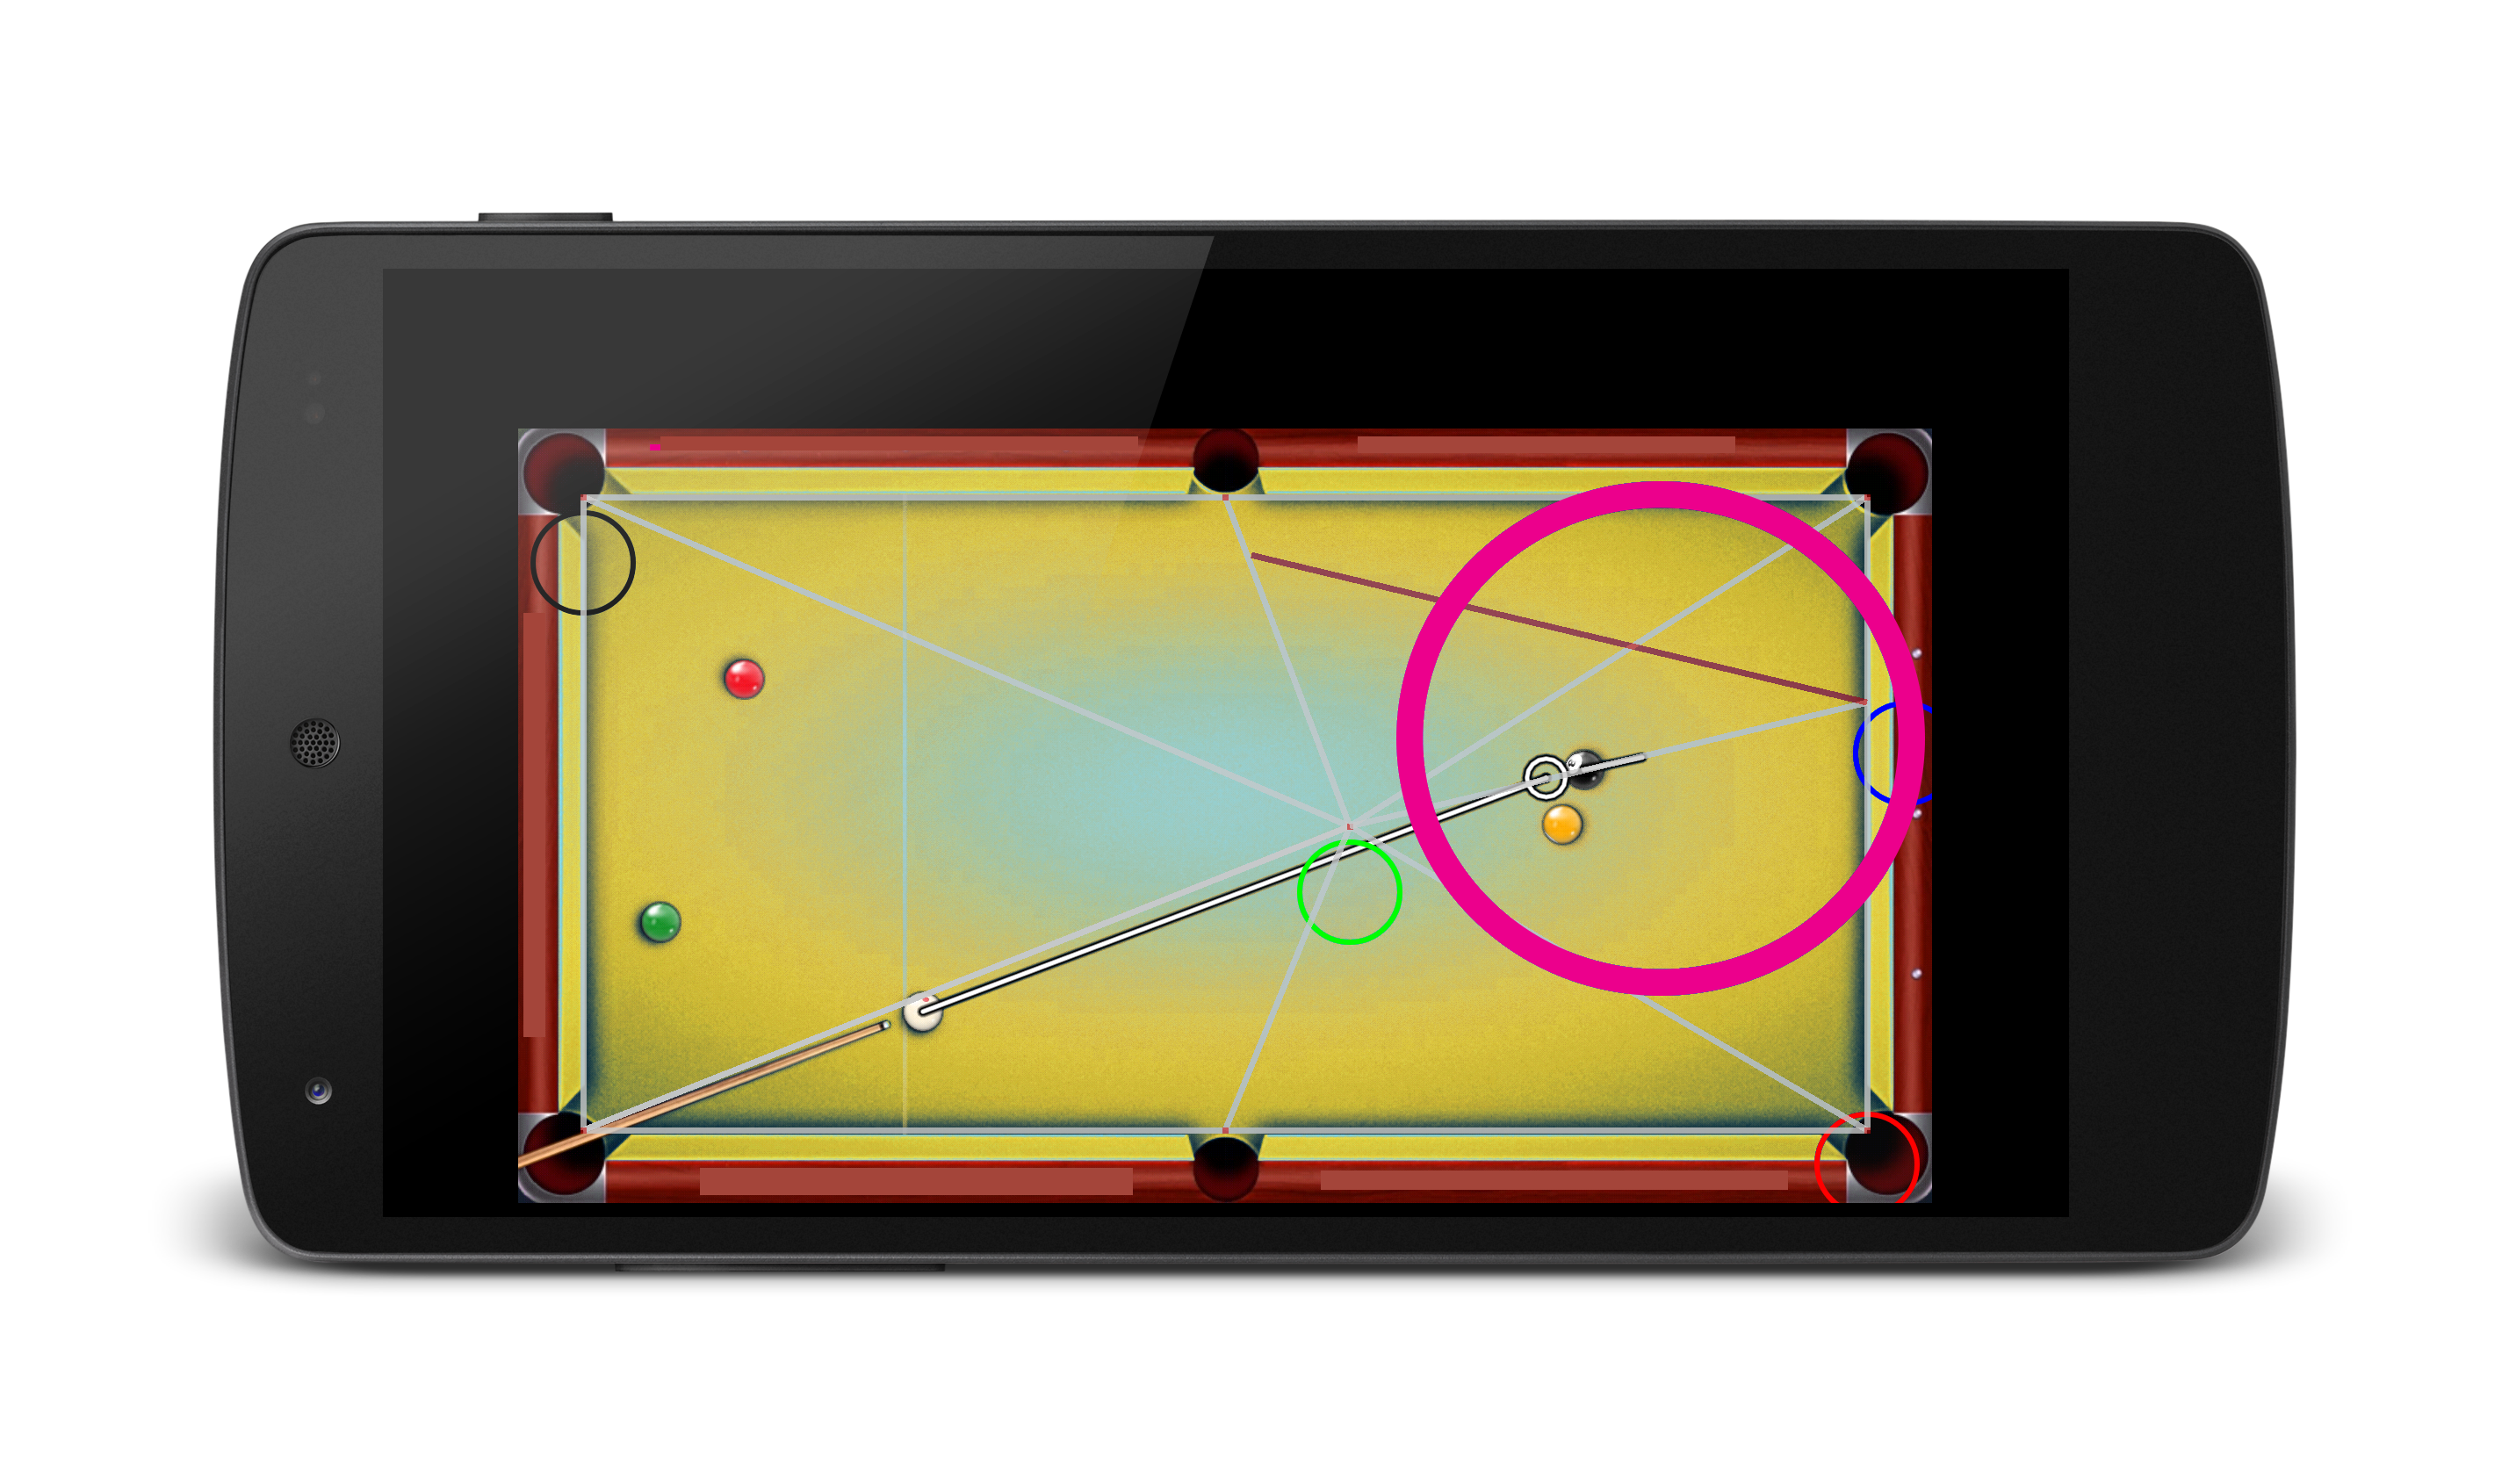 8 Ball Tool Lite for Android - APK Download - 